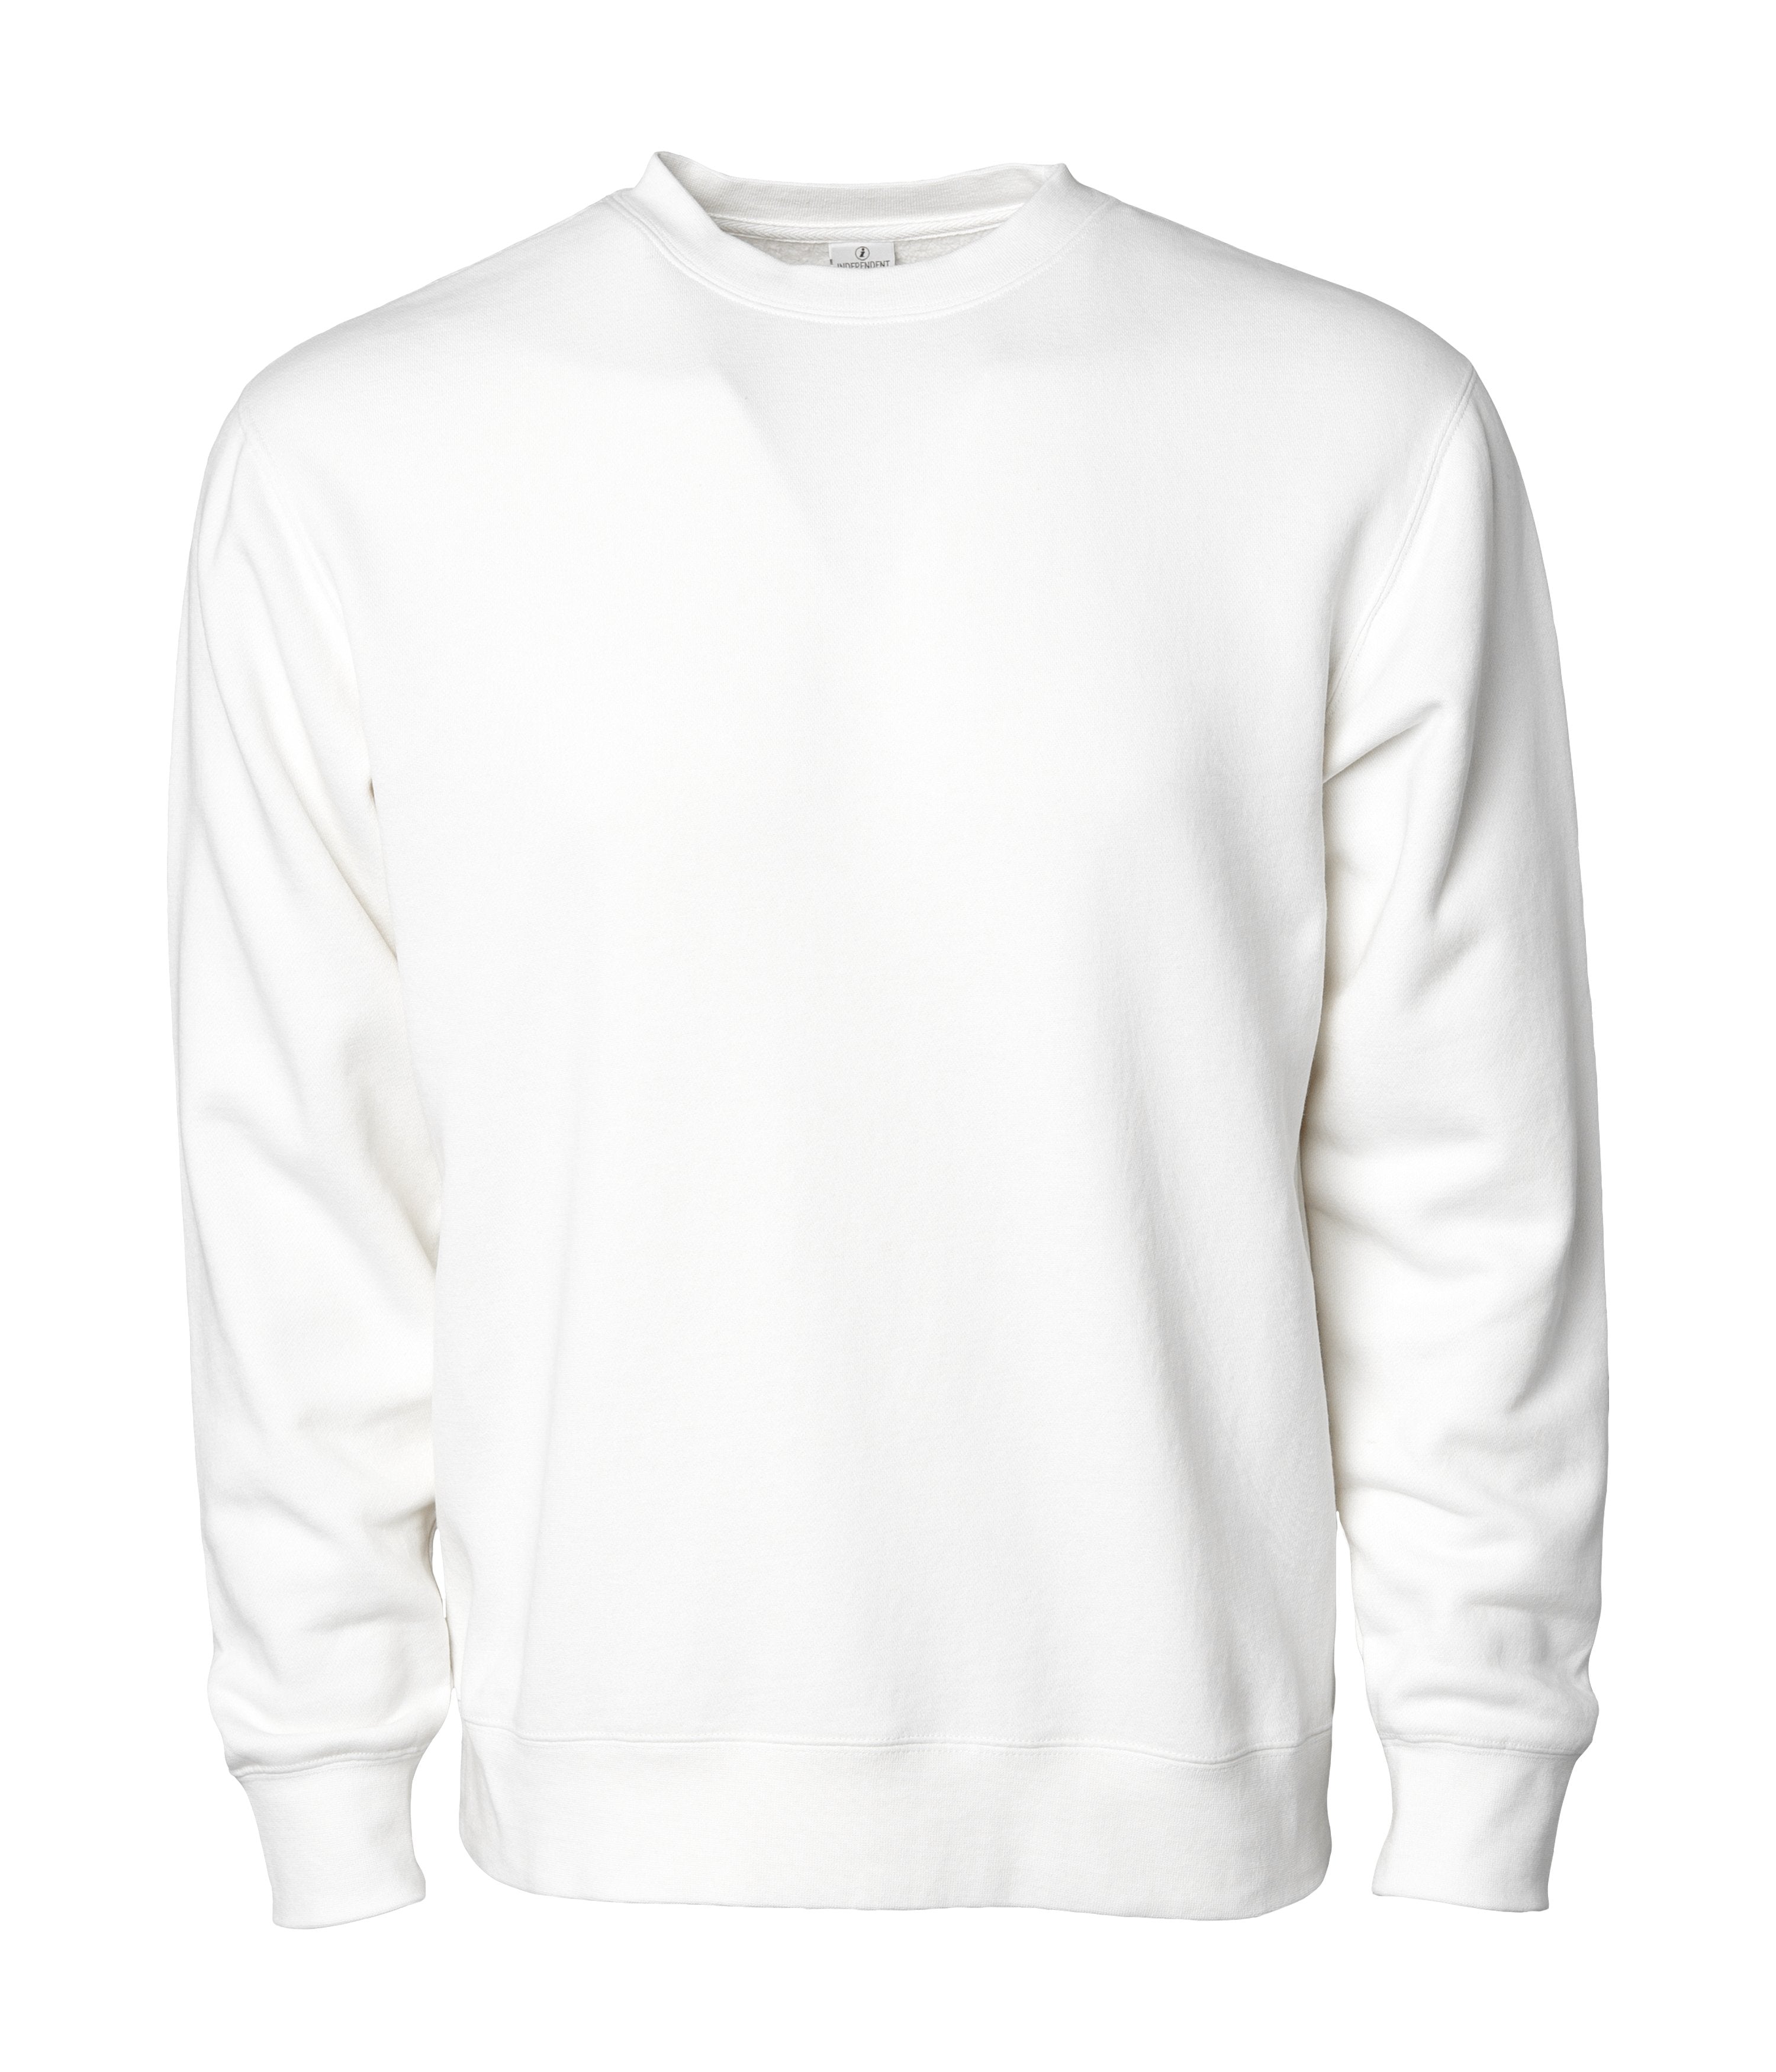 PRM3500 Unisex Midweight Pigment Dyed Crew Neck that is Prepared for Dye (PFD)